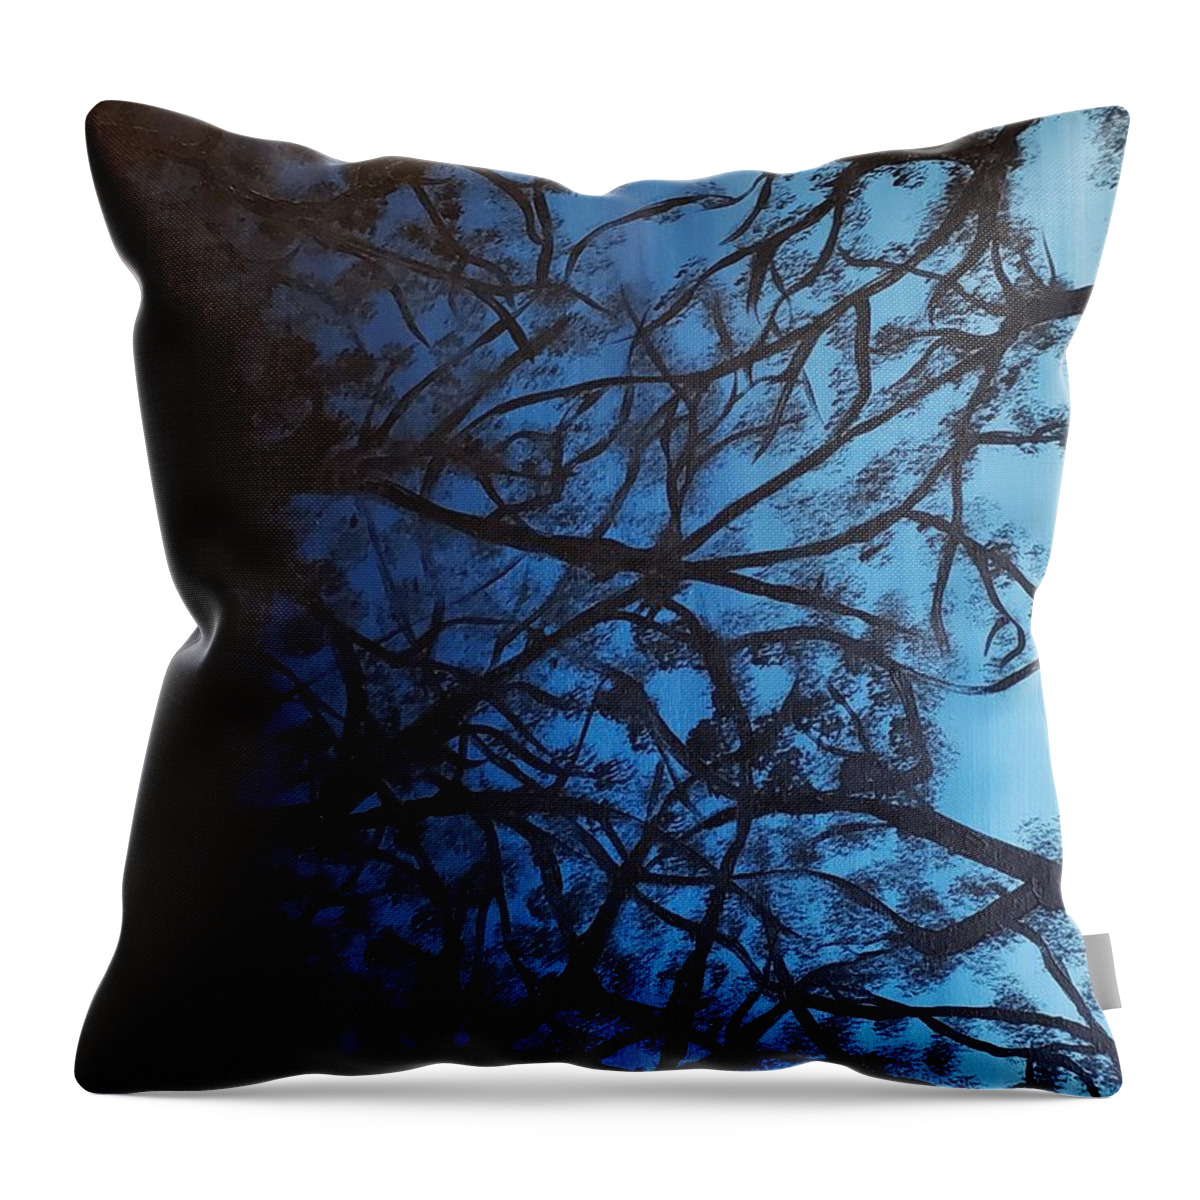 Painting Throw Pillow featuring the painting Looking up through the trees by Kathlene Melvin